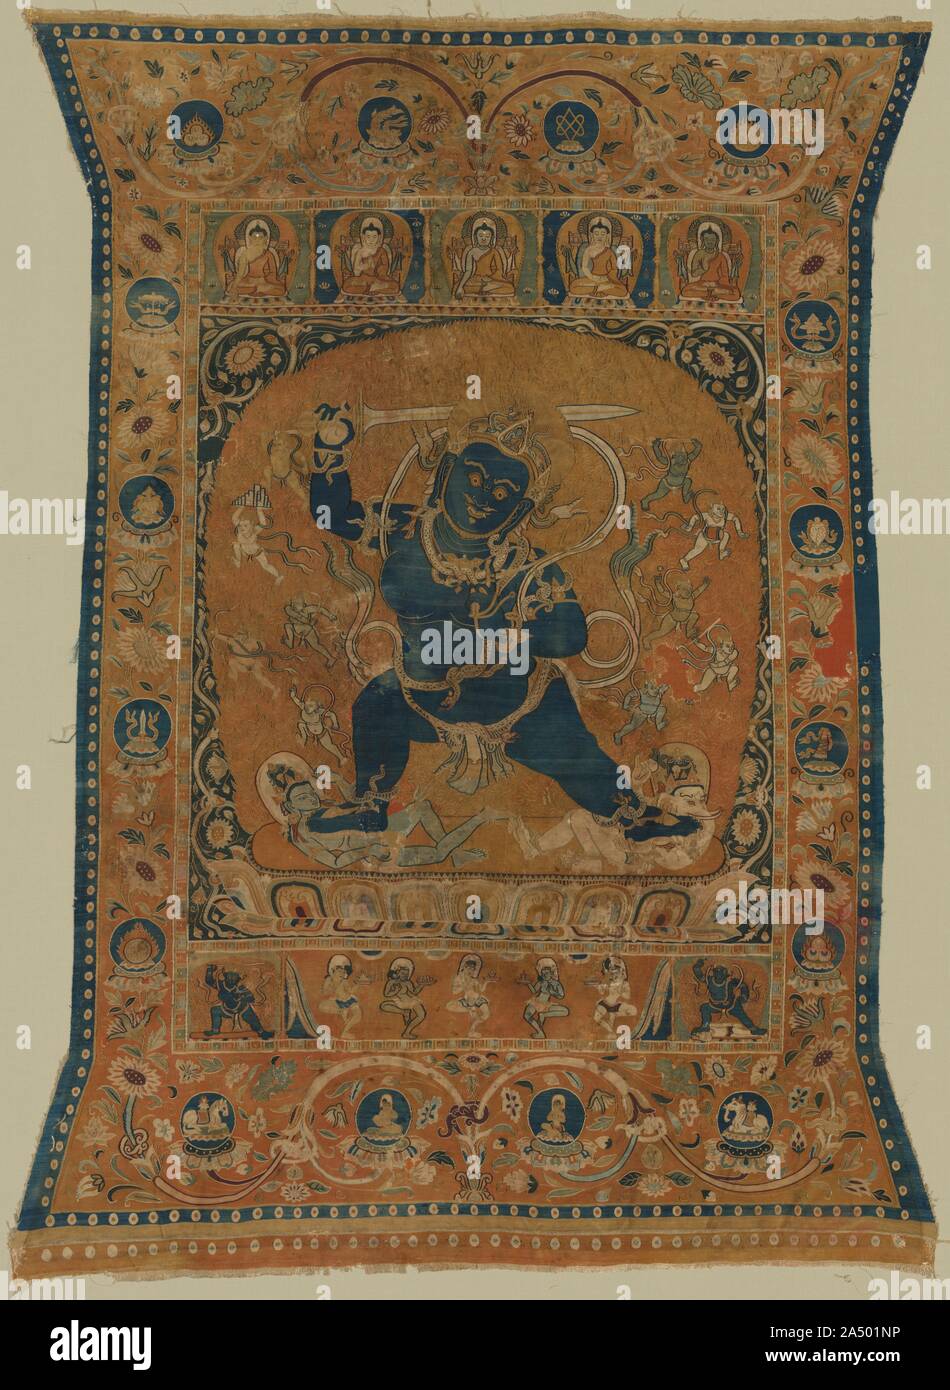 Achala, King of the Wrathful Ones (previously identified as Vighnantaka), early 1200s. Close ties between the Buddhists of the Central Asian Tangut Xia kingdom and Tibetan monasteries resulted in works of devotional art, such as this tangka, featuring a remover of obstacles. The imagery has its roots in Nepal, where Vighnantaka was summoned by a powerful practitioner to defeat the Hindu god Ganesha, who was disturbing the proper performance of a tantric Buddhist ritual. For this reason, Ganesha and his father Shiva are being trampled under the feet of Vighnantaka. Vighnantaka is an emanation o Stock Photo